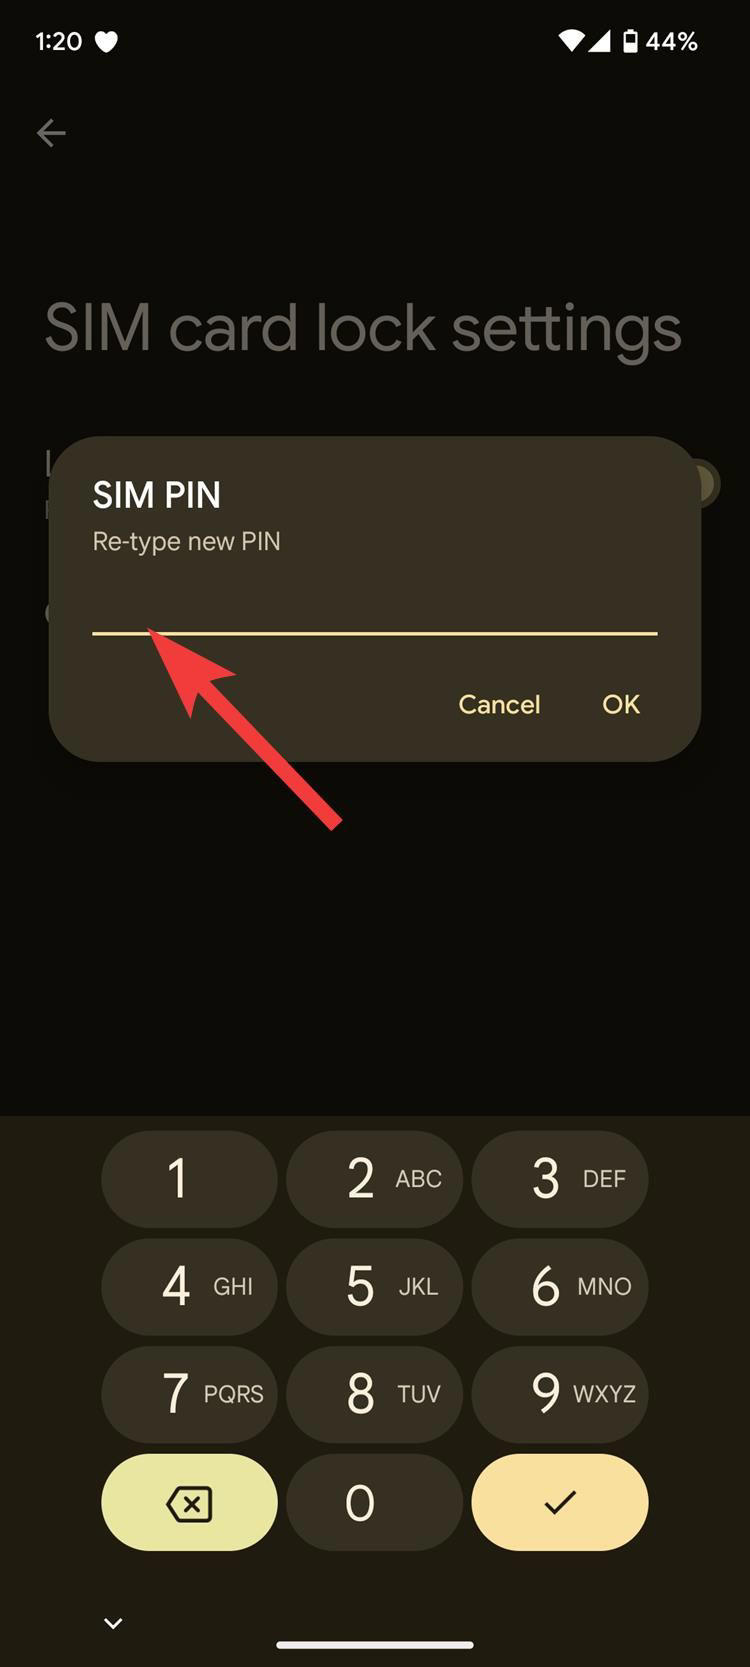 The SIM PIN dialog box prompting you to enter your new SIM PIN on a Pixel phone with a red arrow pointing to the entry line